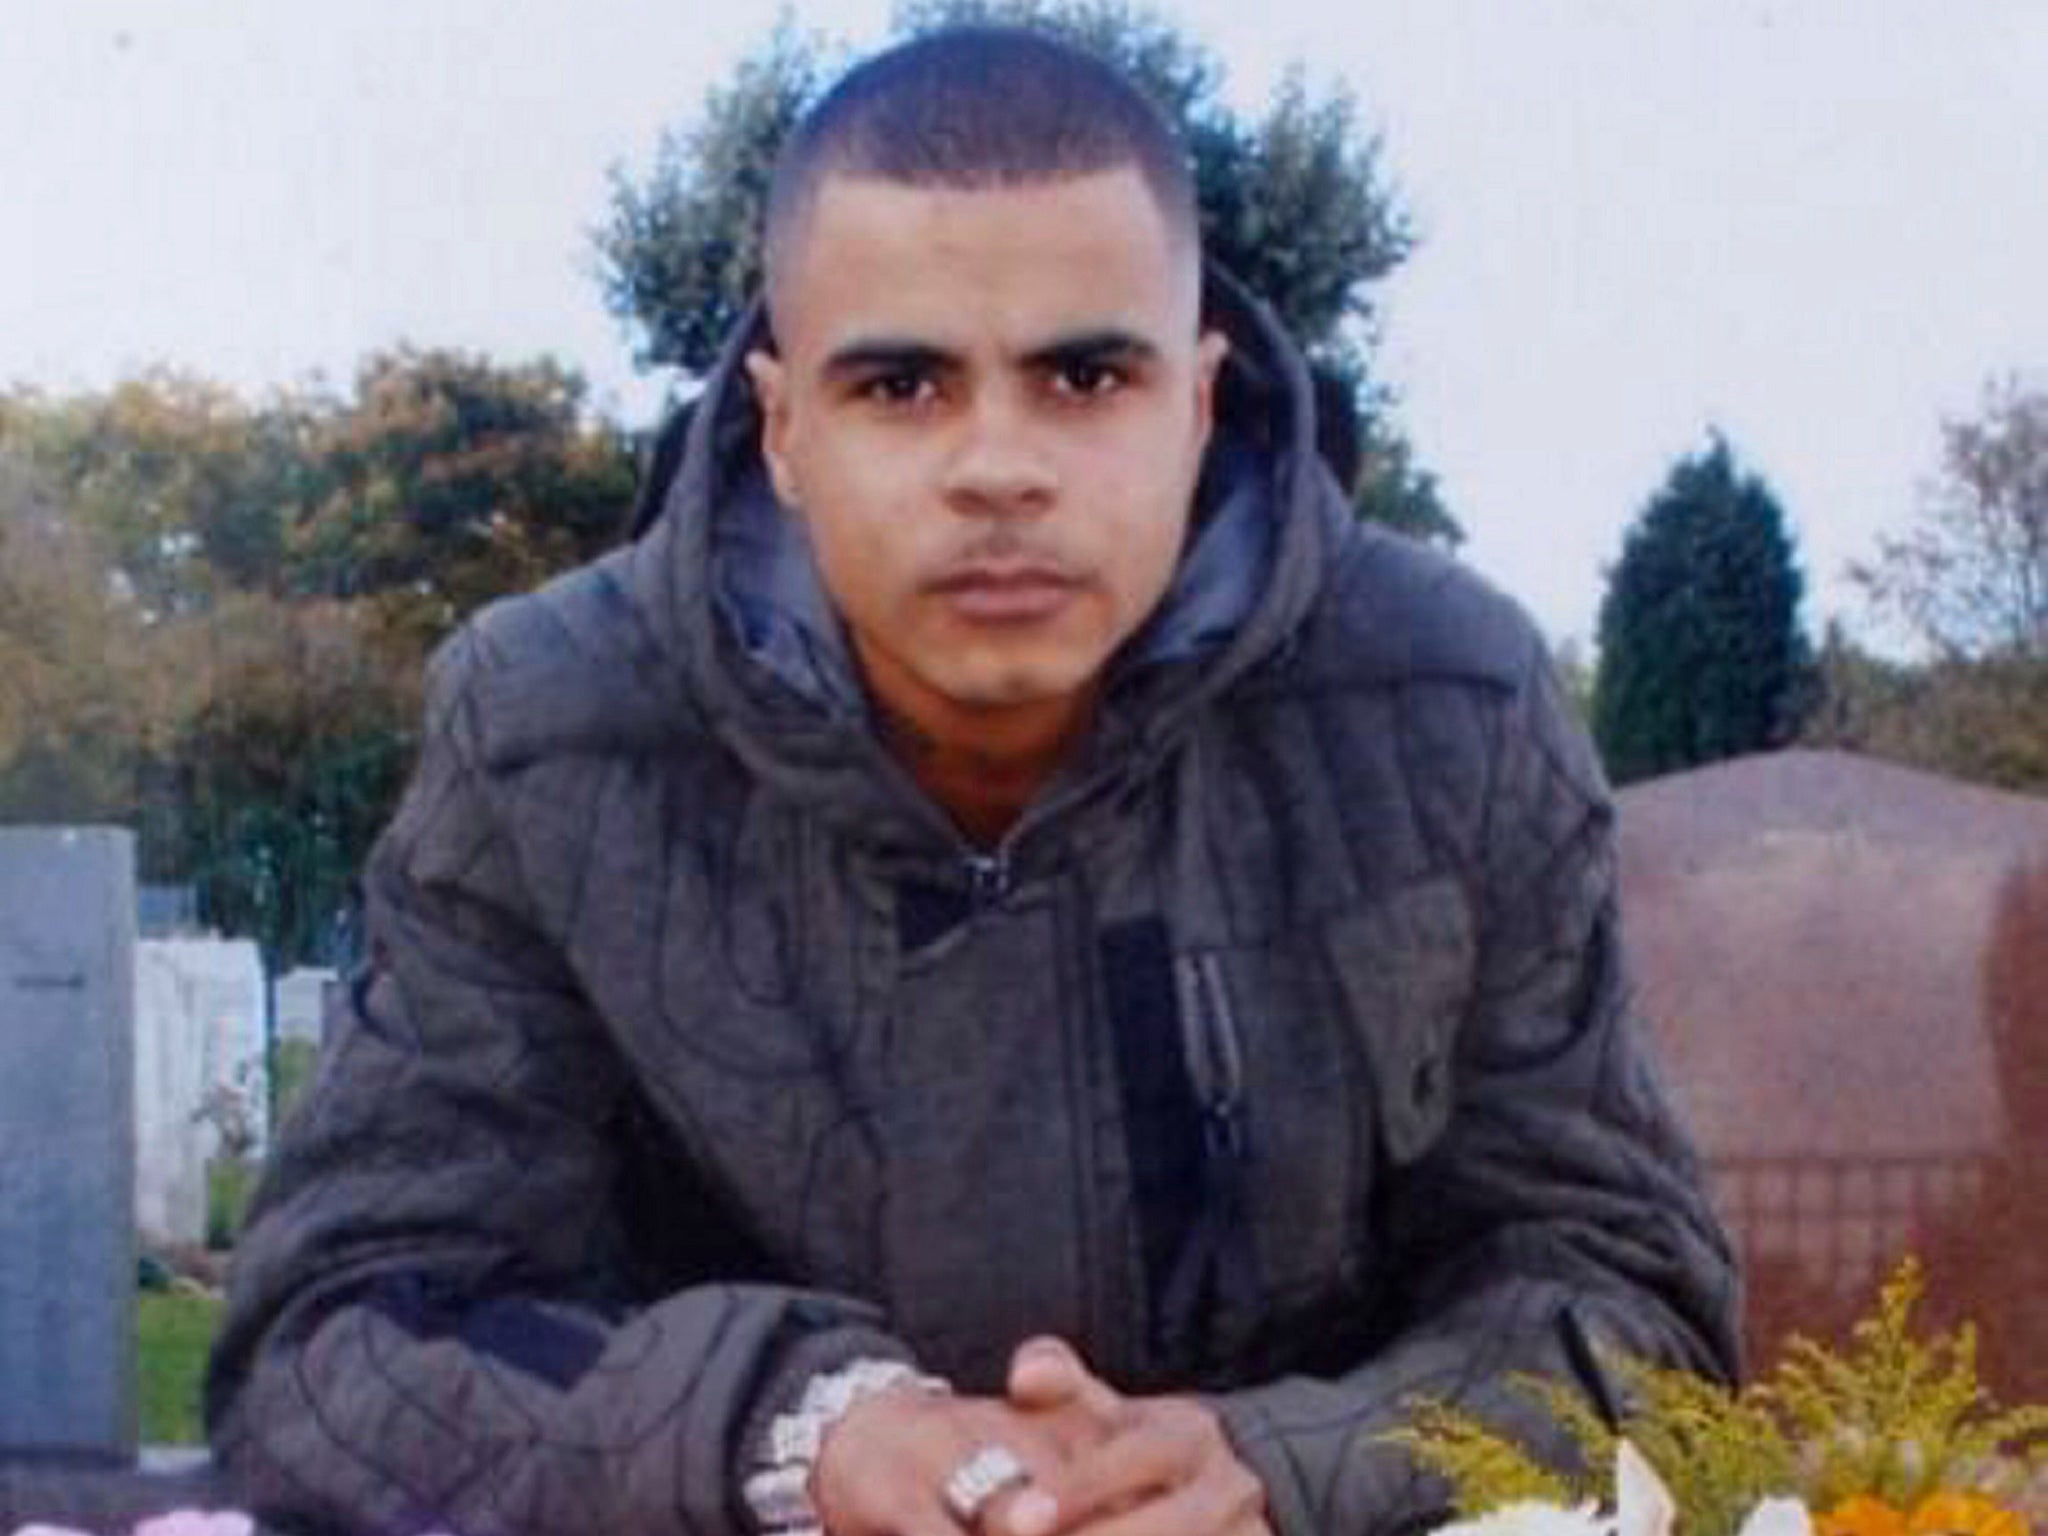 A jury found that Mark Duggan had been unarmed but had been lawfully shot twice by a police marksman